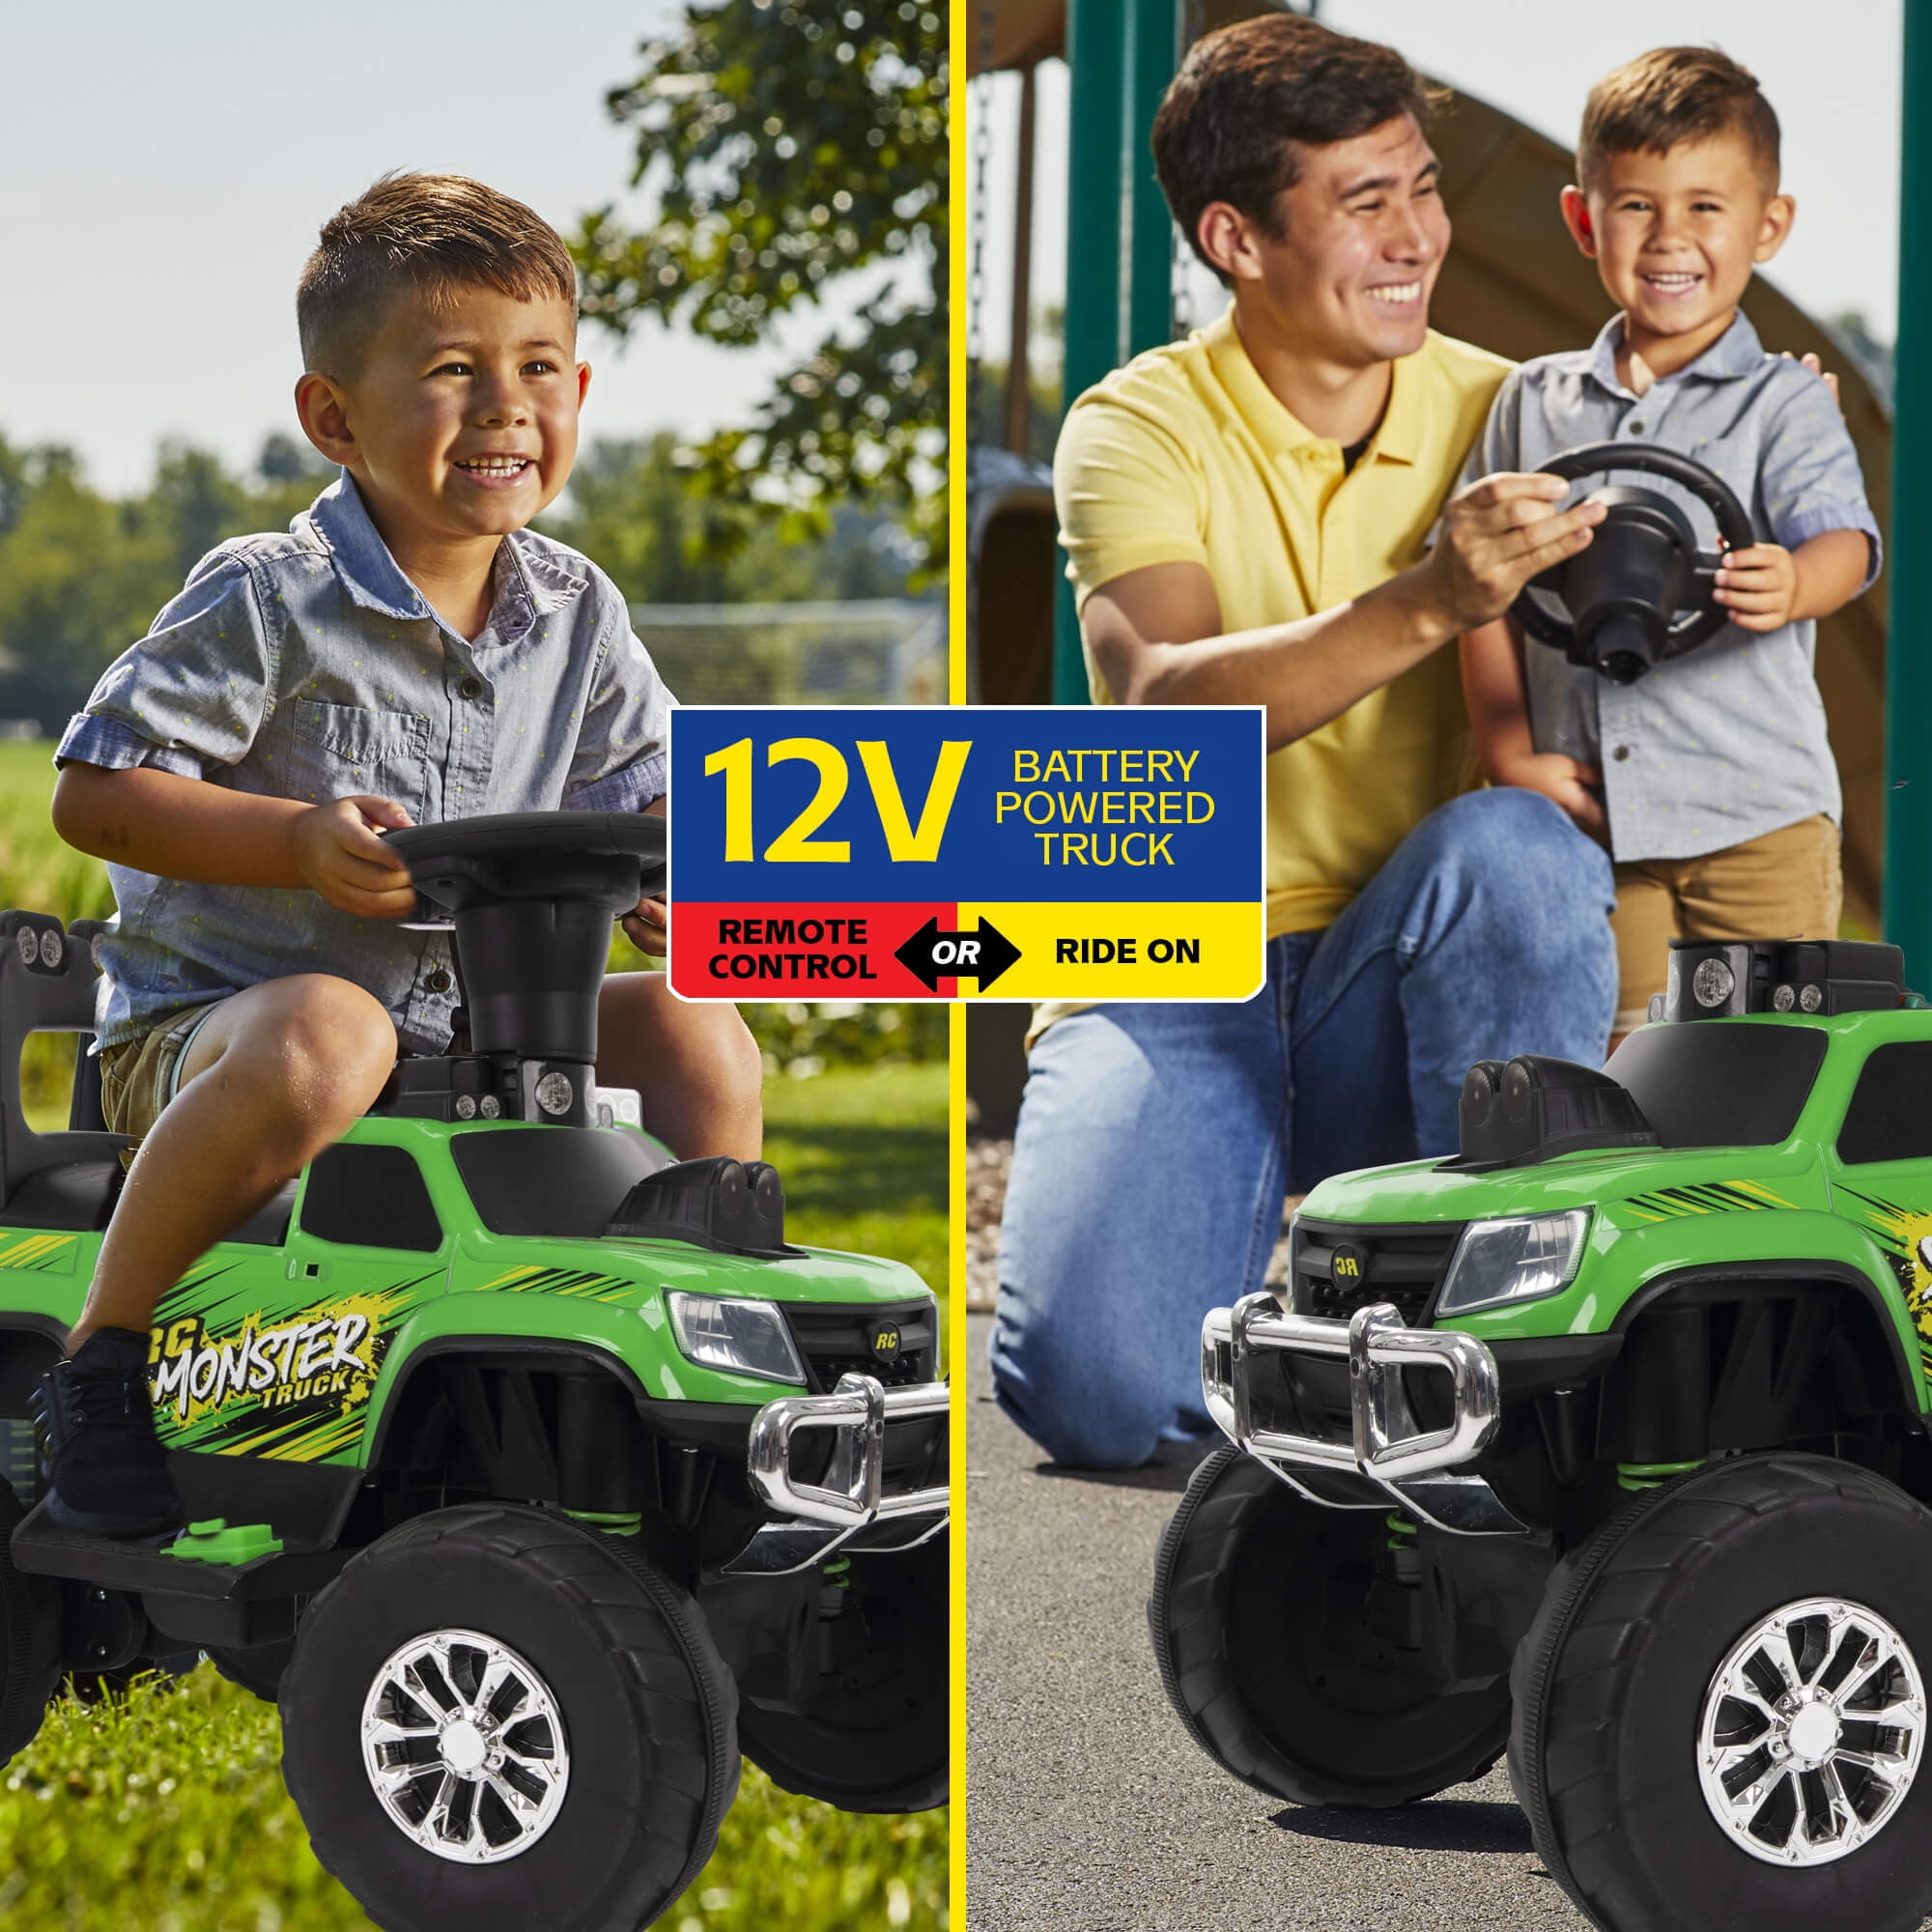 24 volt battery powered ride on toys with remote control